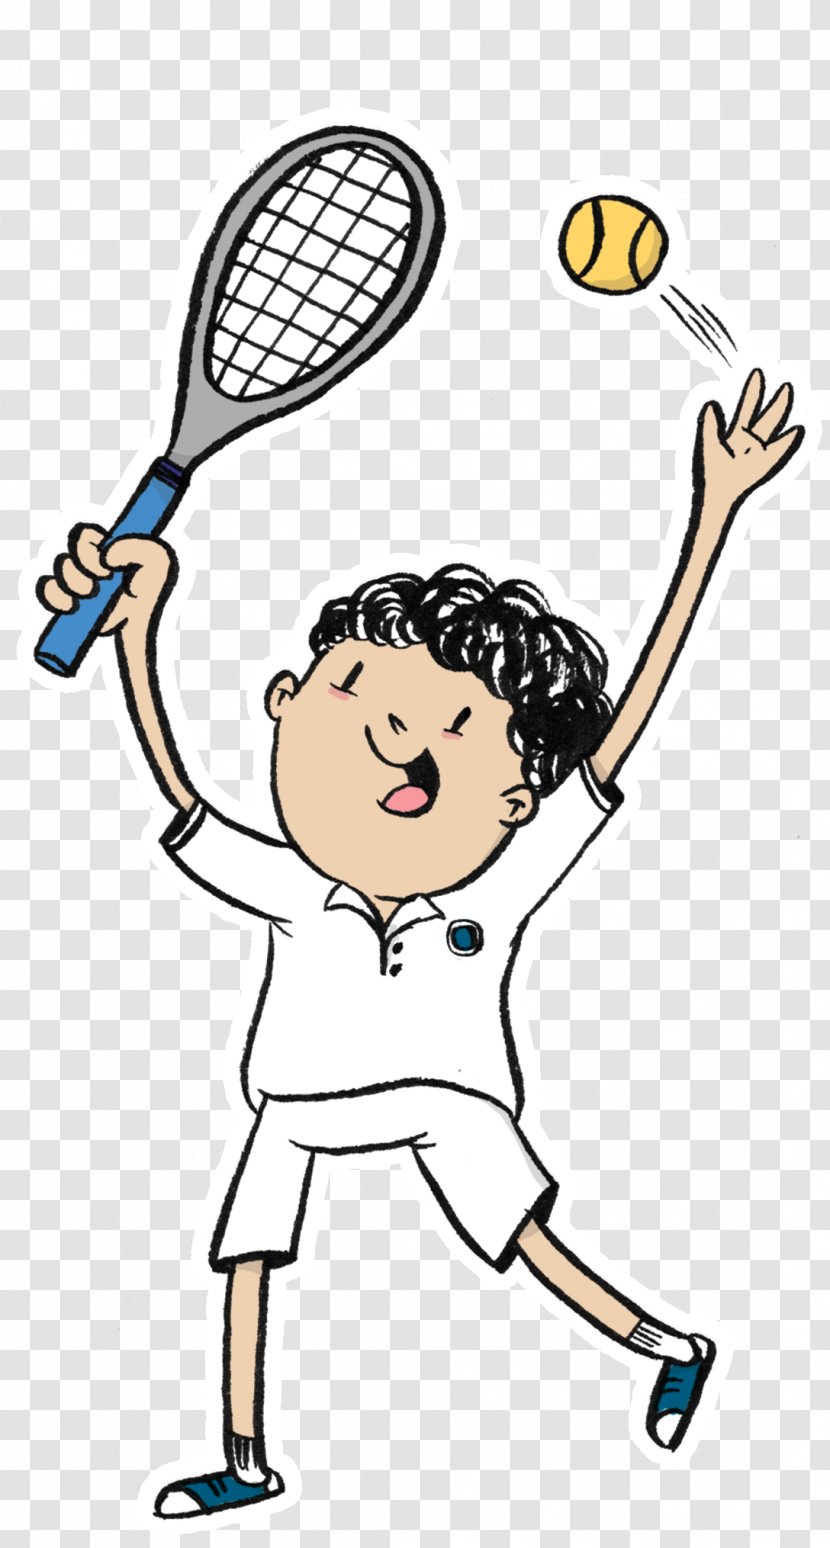 Tennis Ball - Racket - Play Pleased Transparent PNG